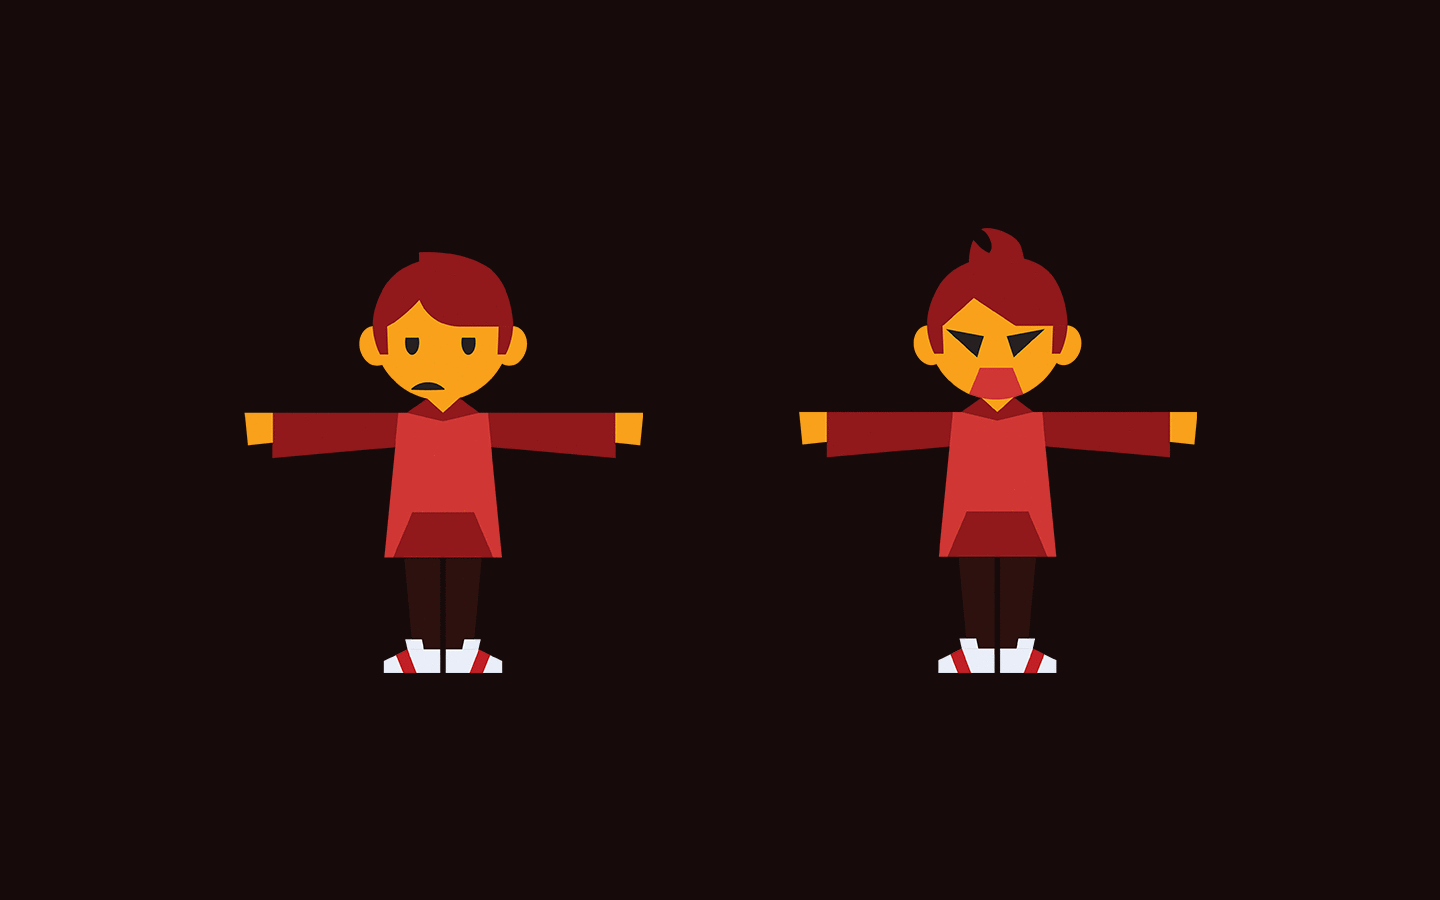 image of a character turn around for the main character of the explainer video